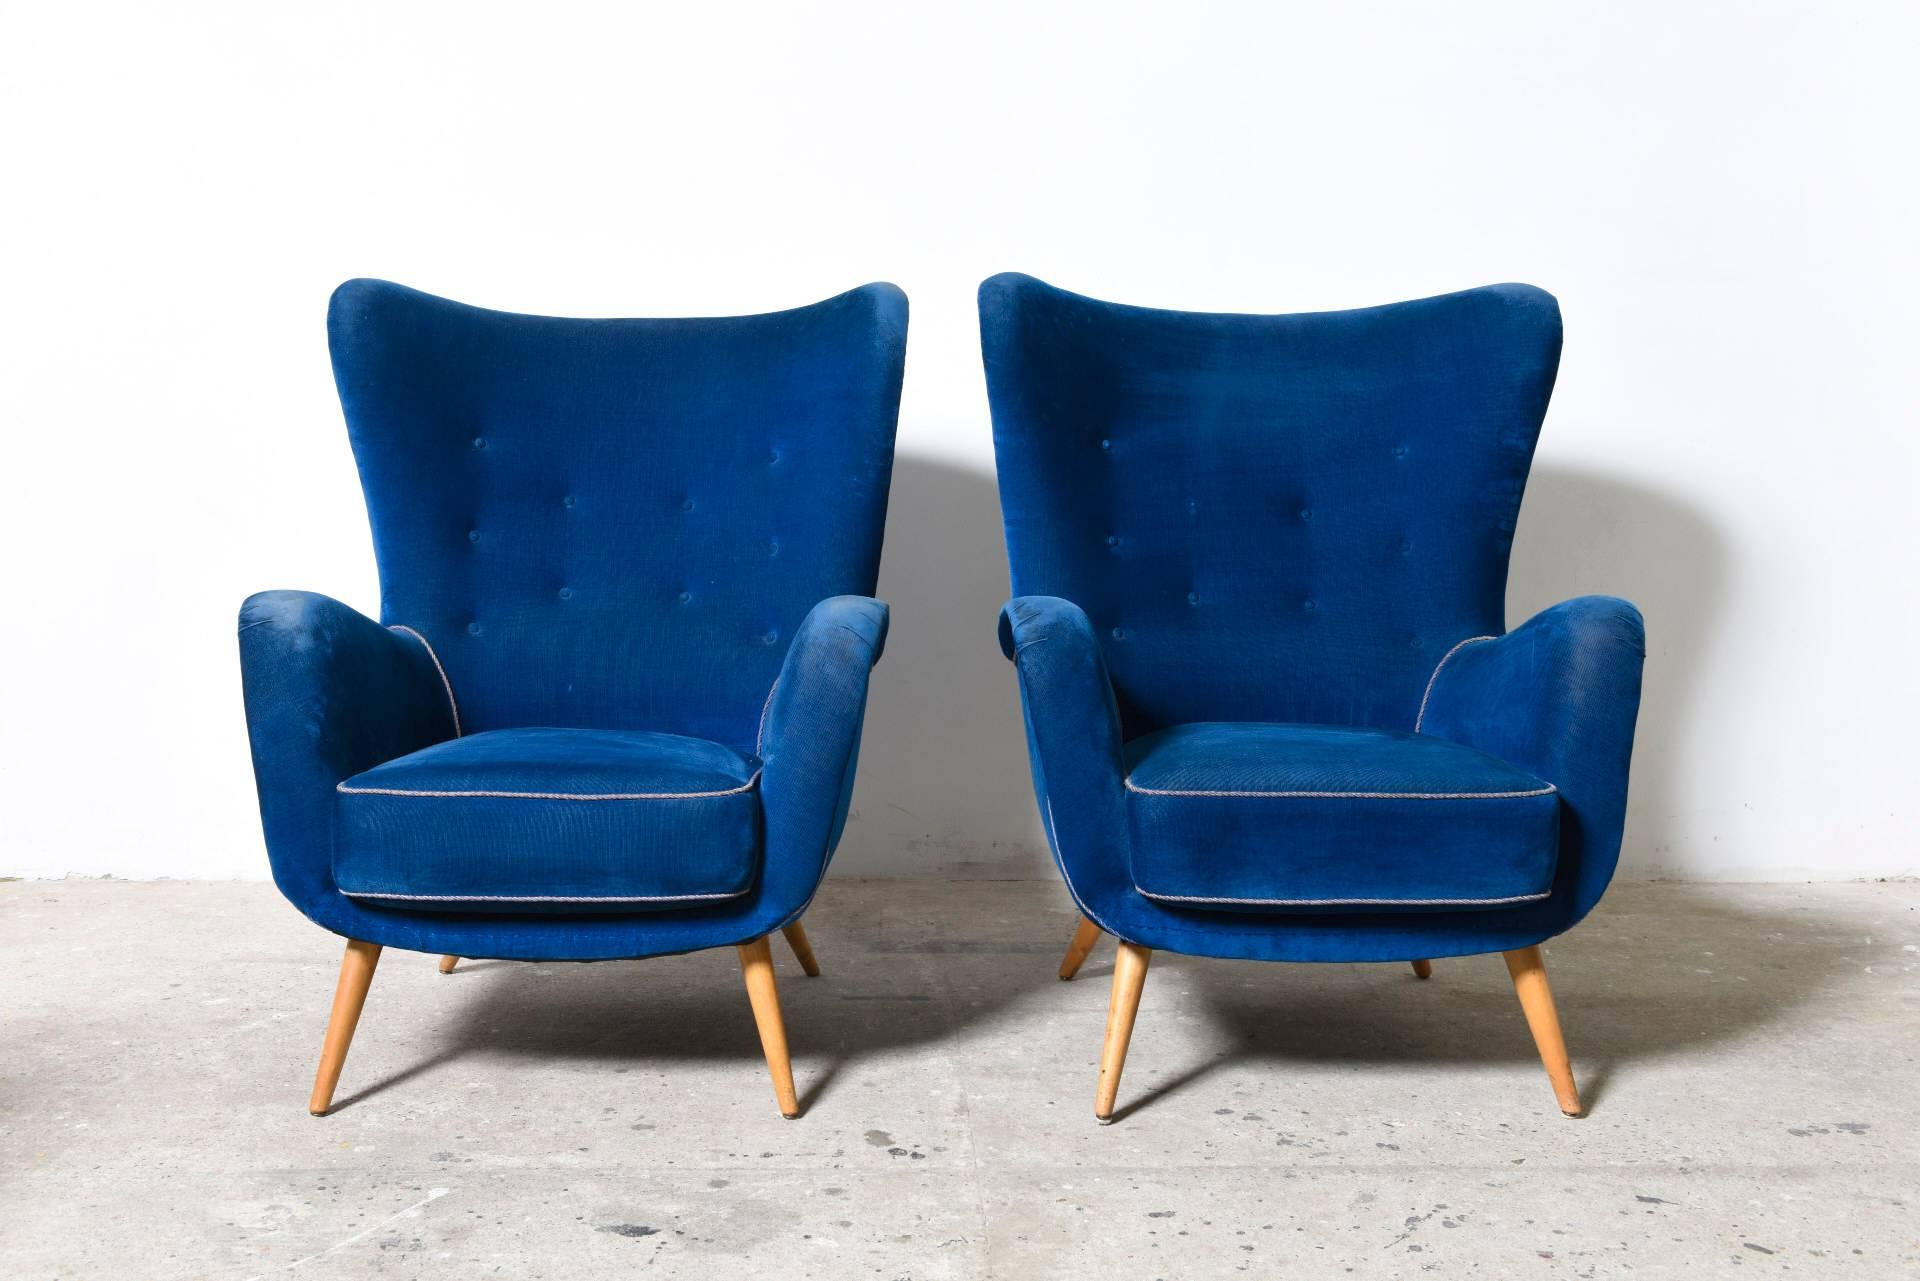 A rare pair of Mid-Century oversized lounge chairs each with a well-shaped backrest with wing detail and armrests.
The clubs also feature round tapering beech legs

Organic shaped blue velvet cocoon lounge chairs features its original upholstery.